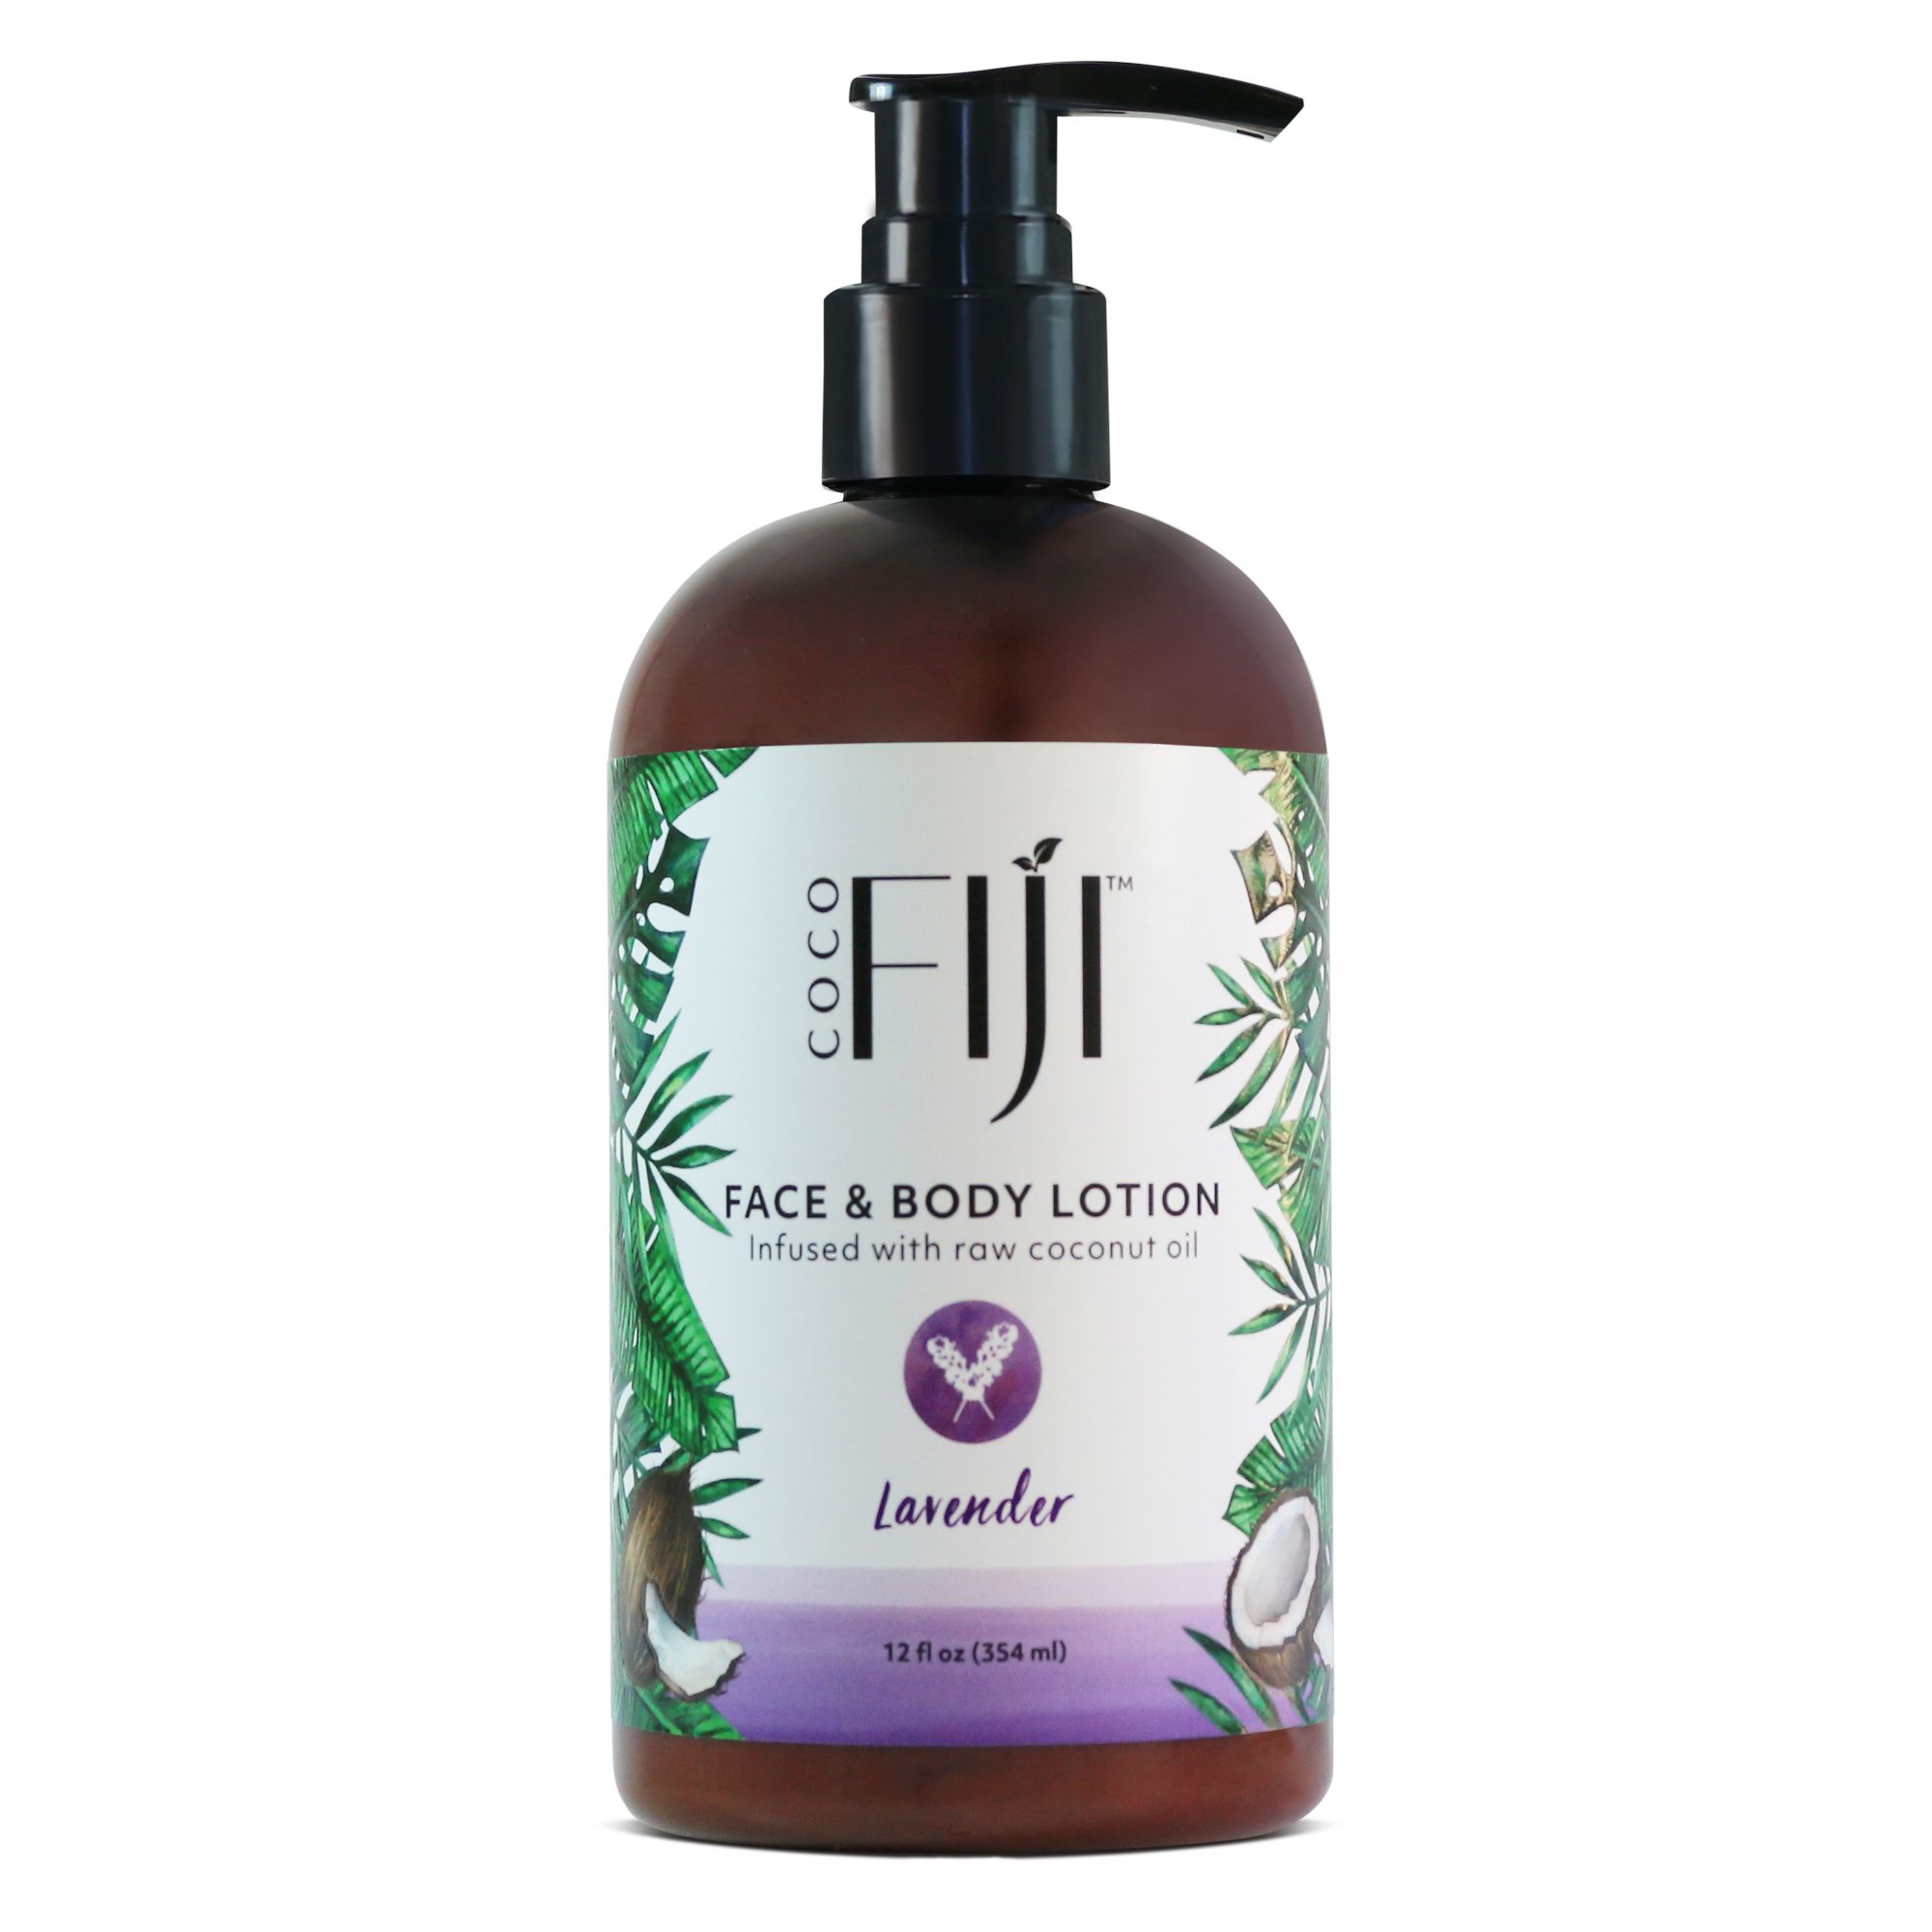 833884000084 12 Oz Infused Face & Body Lotion With Raw Coconut Oil, Lavender